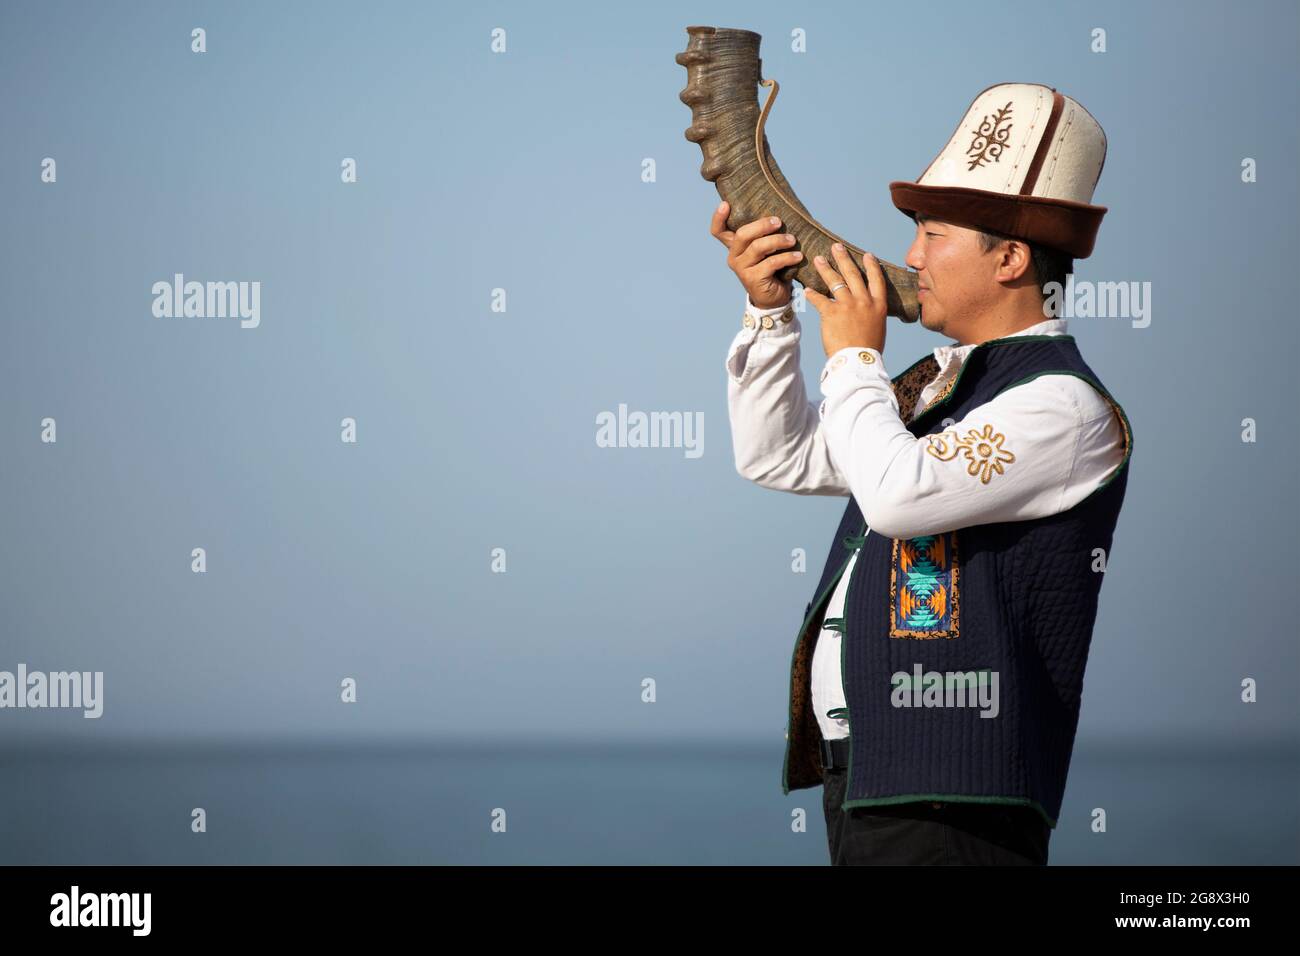 Kyrgyz musician playing local traditional instrument, in Issyk Kul, Kyrgyzstan. Stock Photo